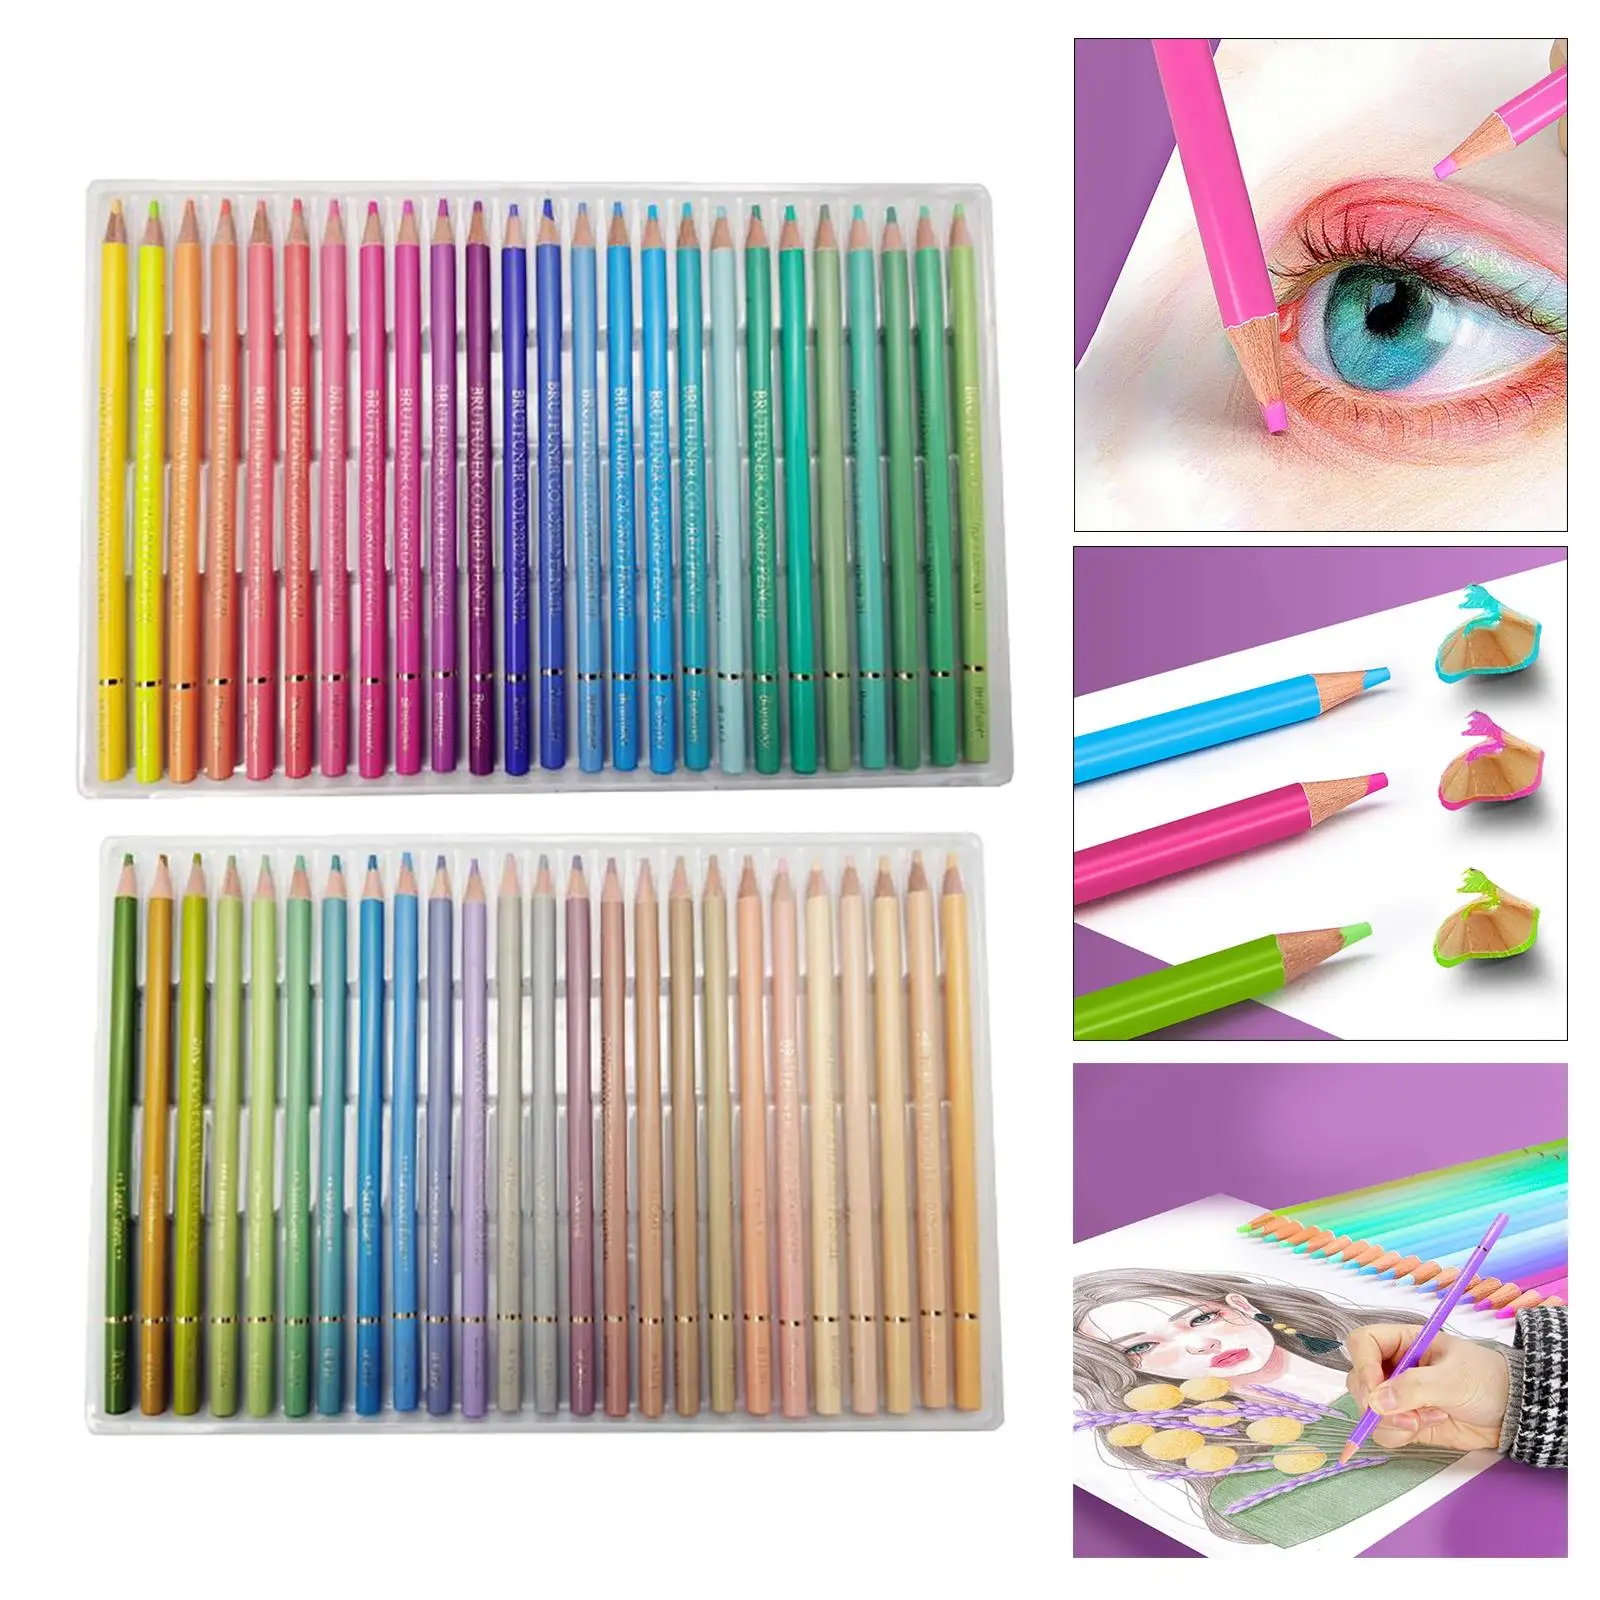 50 Colors Oil Colored Pencils Carry Anywhere Wood Art Supplies for Children Professionals School Art Coloring Blending Crafting